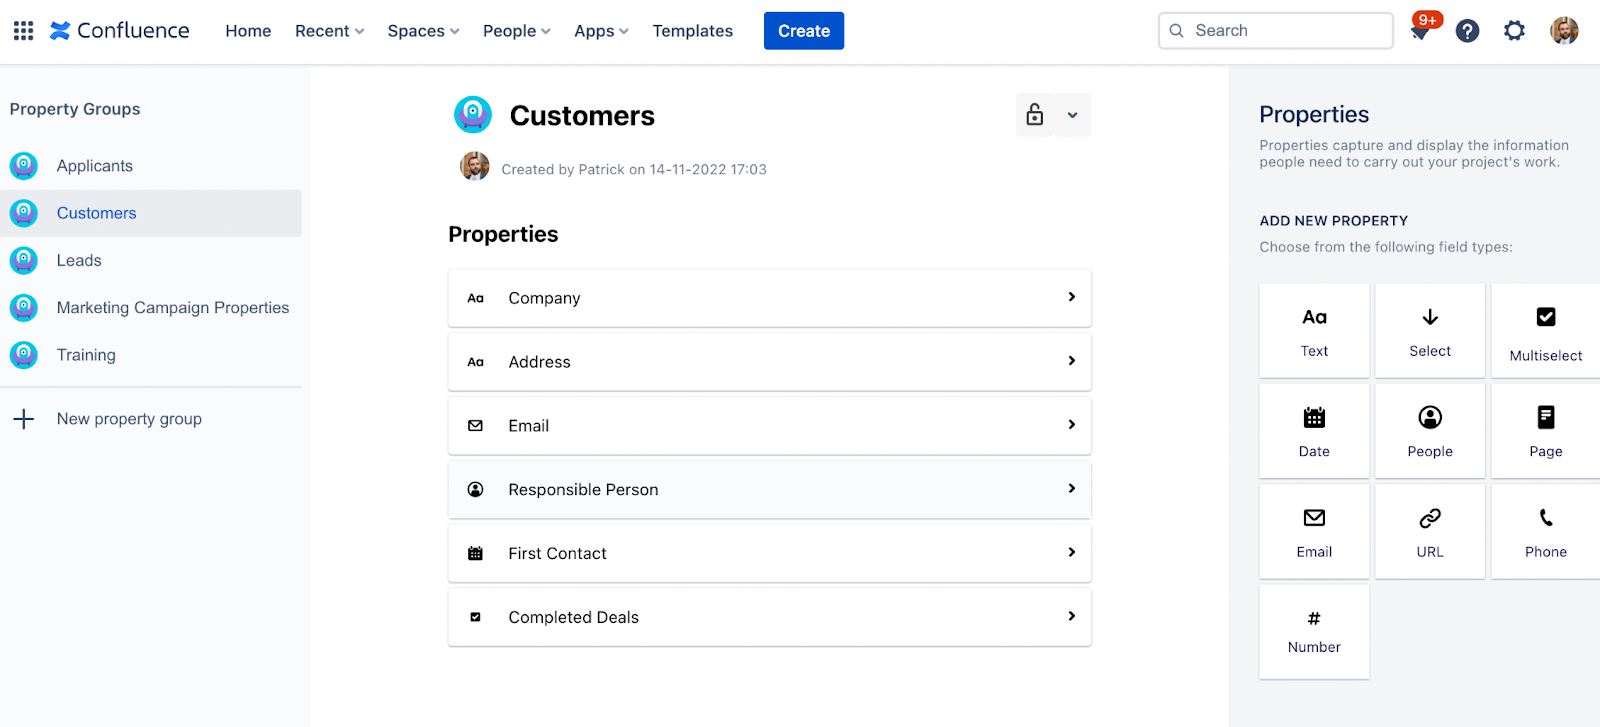 Keep Your Customer Data in one place in Confluence Cloud - Confluence and properties as a CRM 2